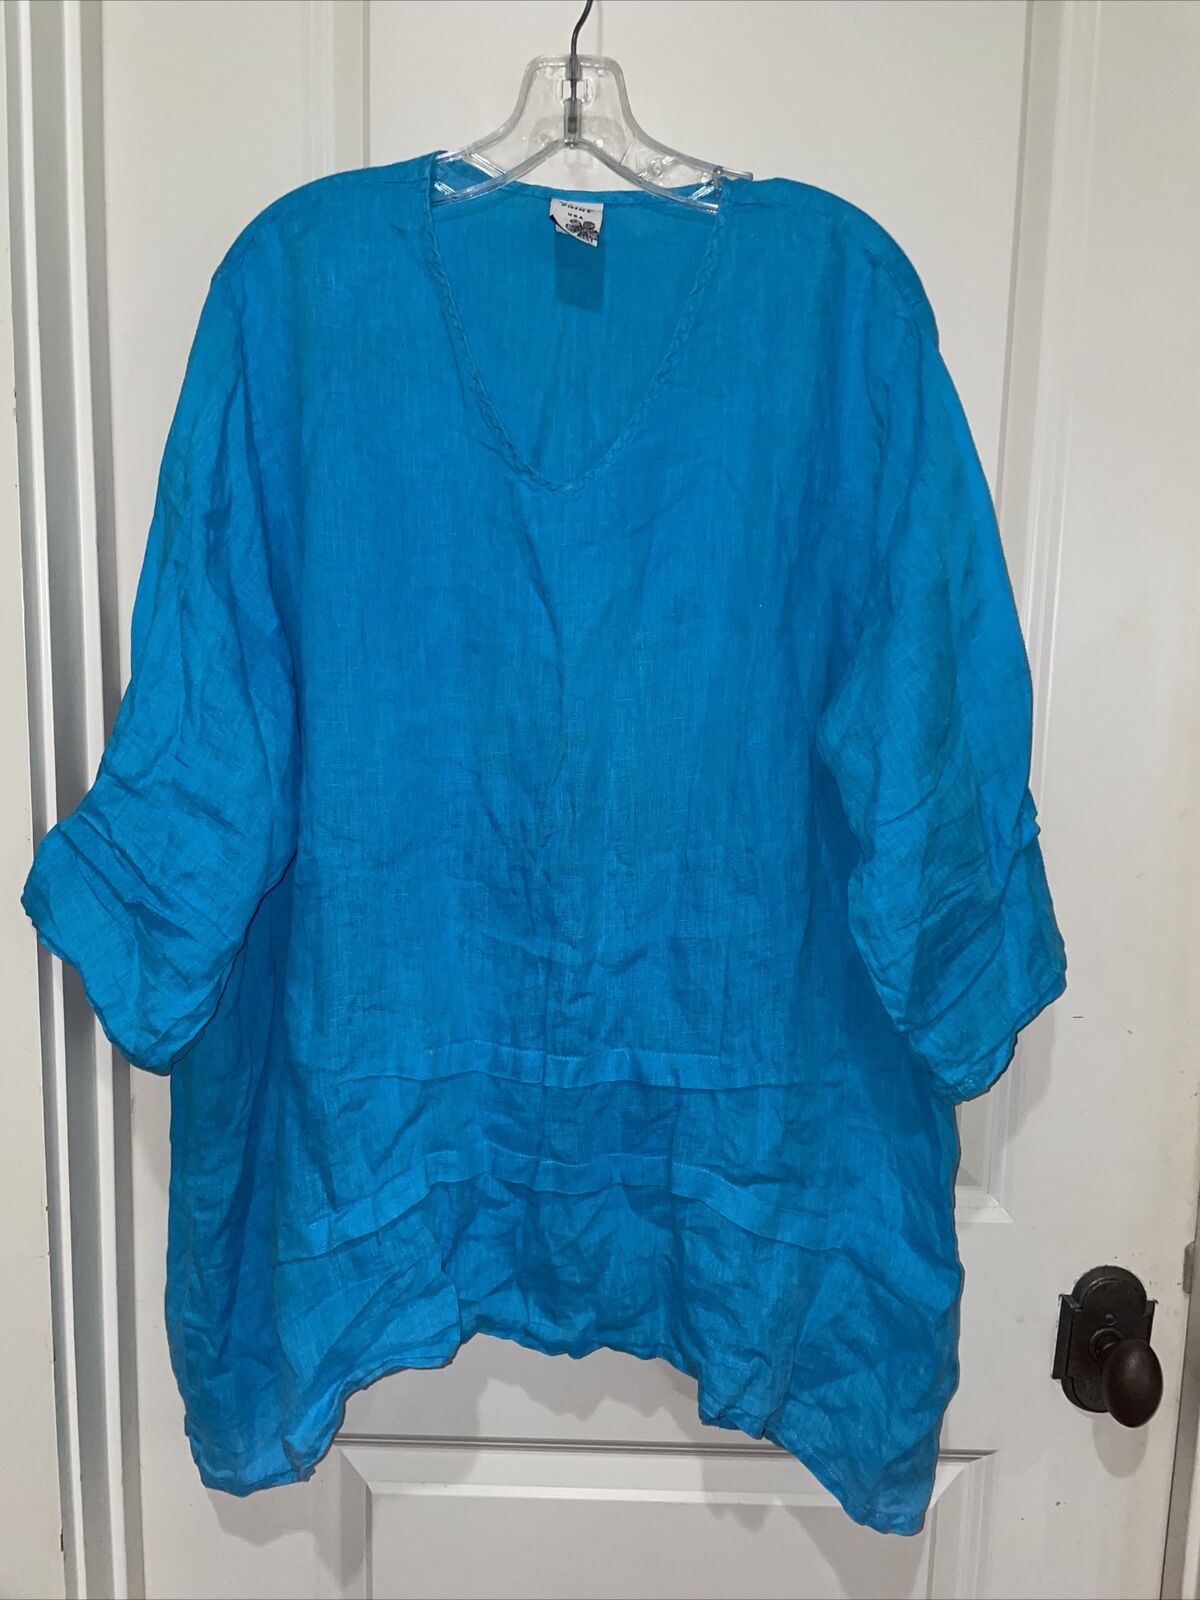 Match Point Turquoise Blue Linen Tunic Top Oversi… - image 1